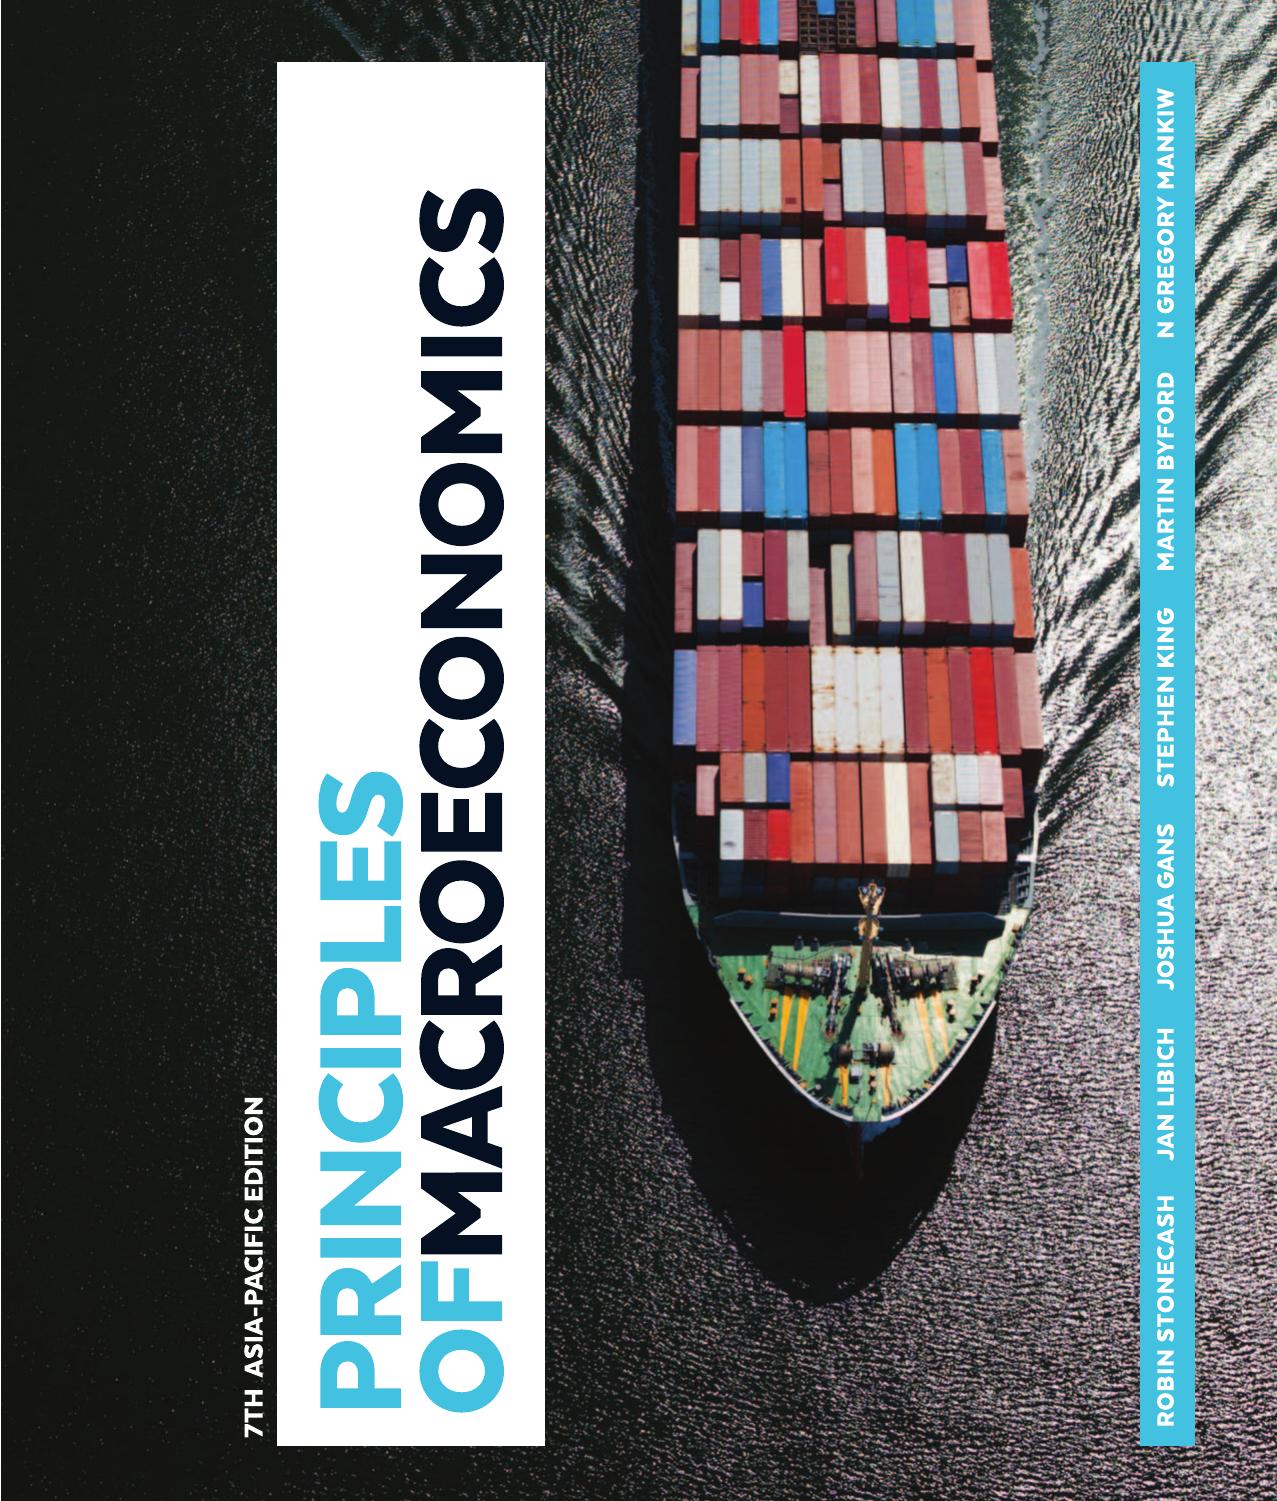 (Test Bank)Principles of Macroeconomics Asia-Pacific 7th Edition by Robin Stonecash,Joshua Gans